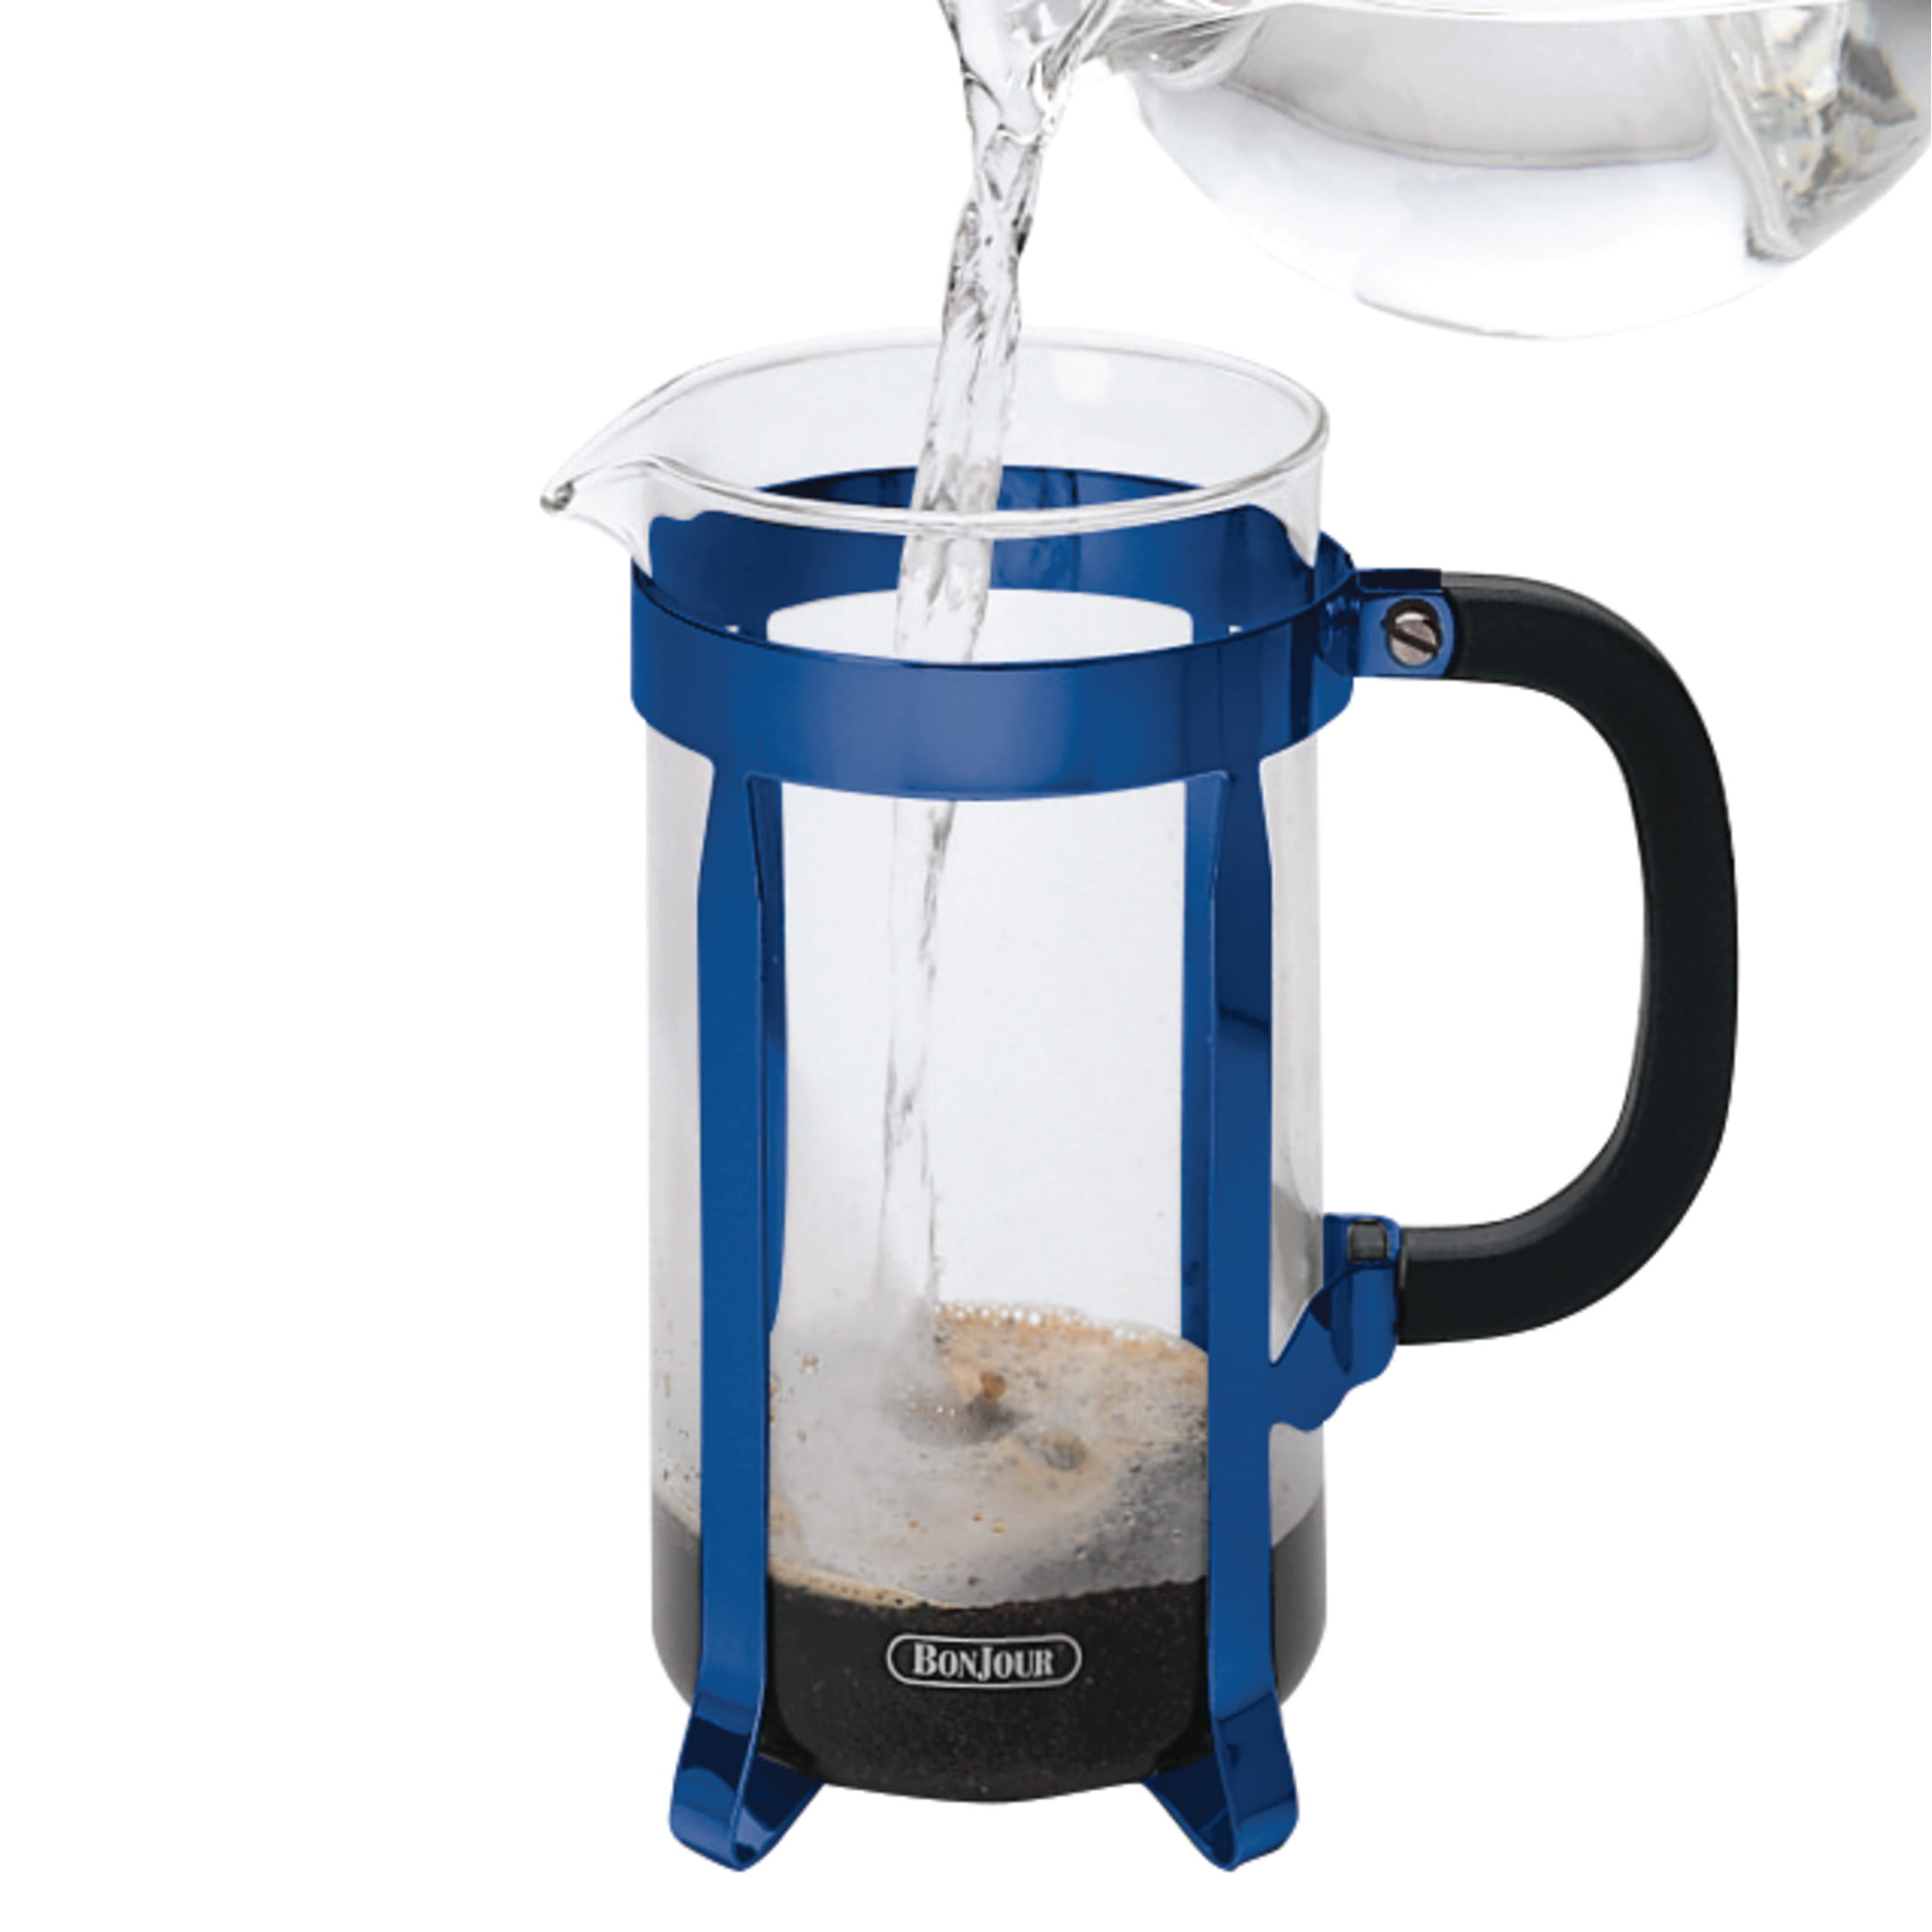 Bonjour Maximus 8-Cup French Press - Blue